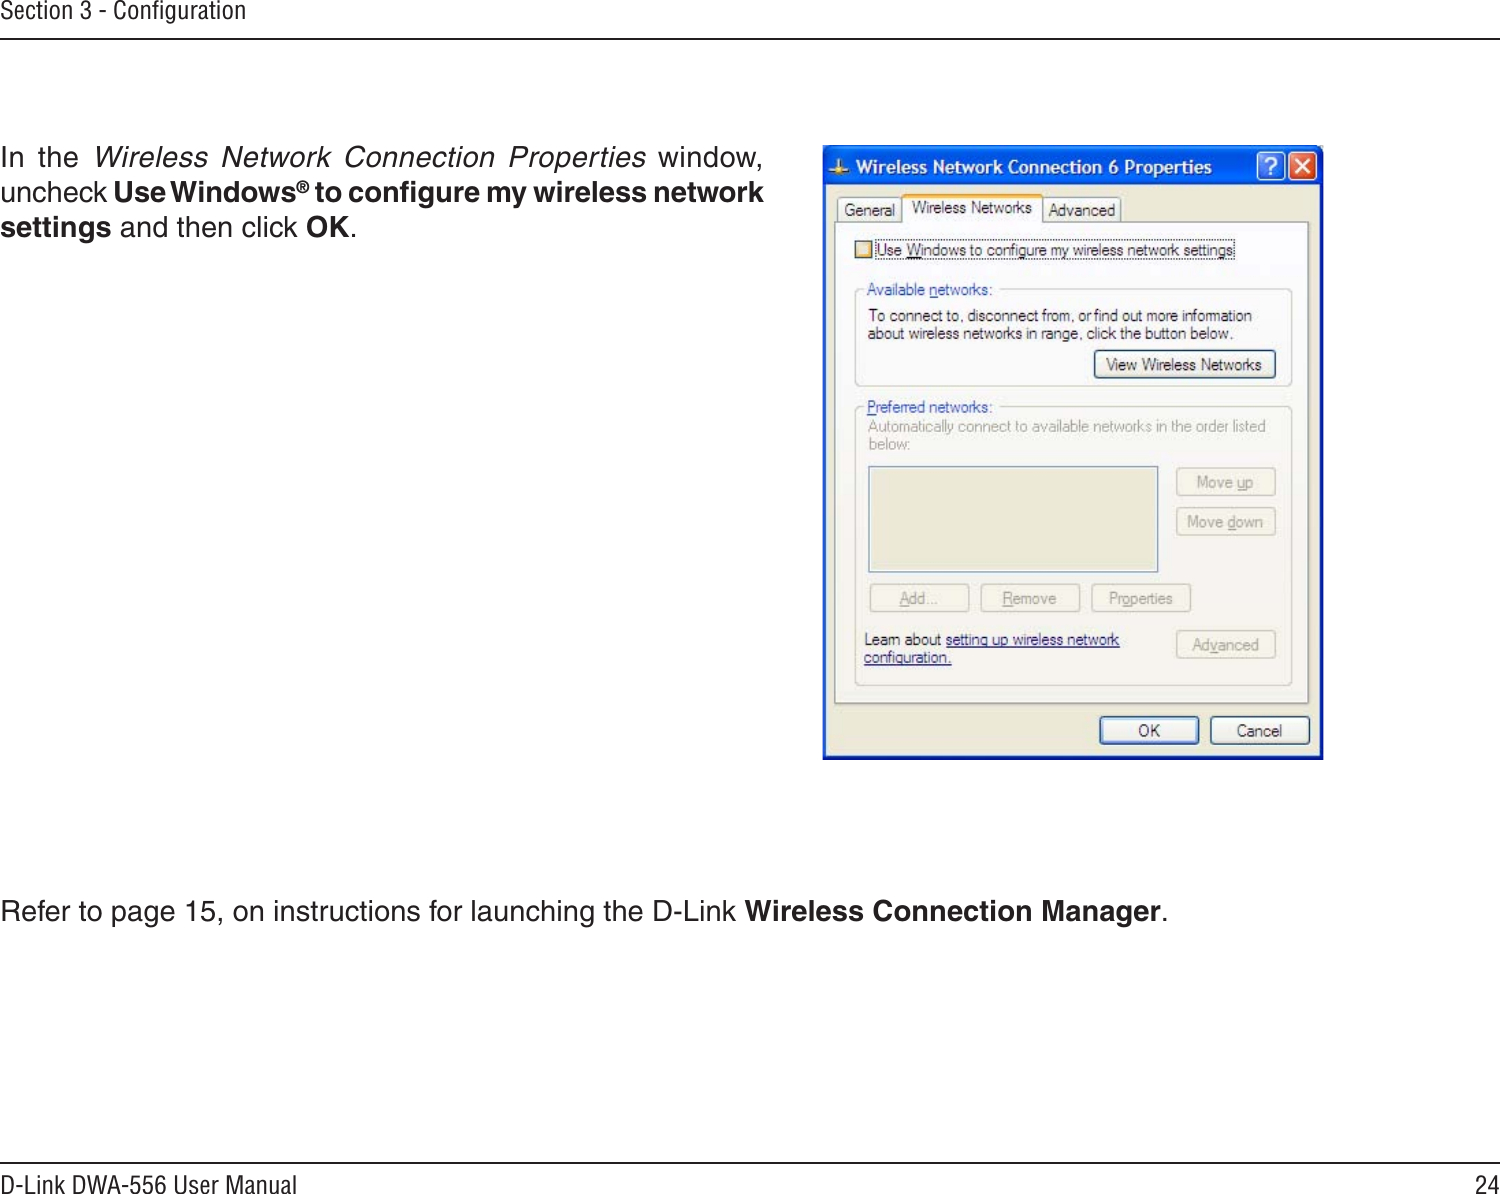 24D-Link DWA-556 User ManualSection 3 - ConﬁgurationIn  the  Wireless  Network  Connection  Properties  window, uncheck Use Windows® to conﬁgure my wireless network settings and then click OK.Refer to page 15, on instructions for launching the D-Link Wireless Connection Manager. 